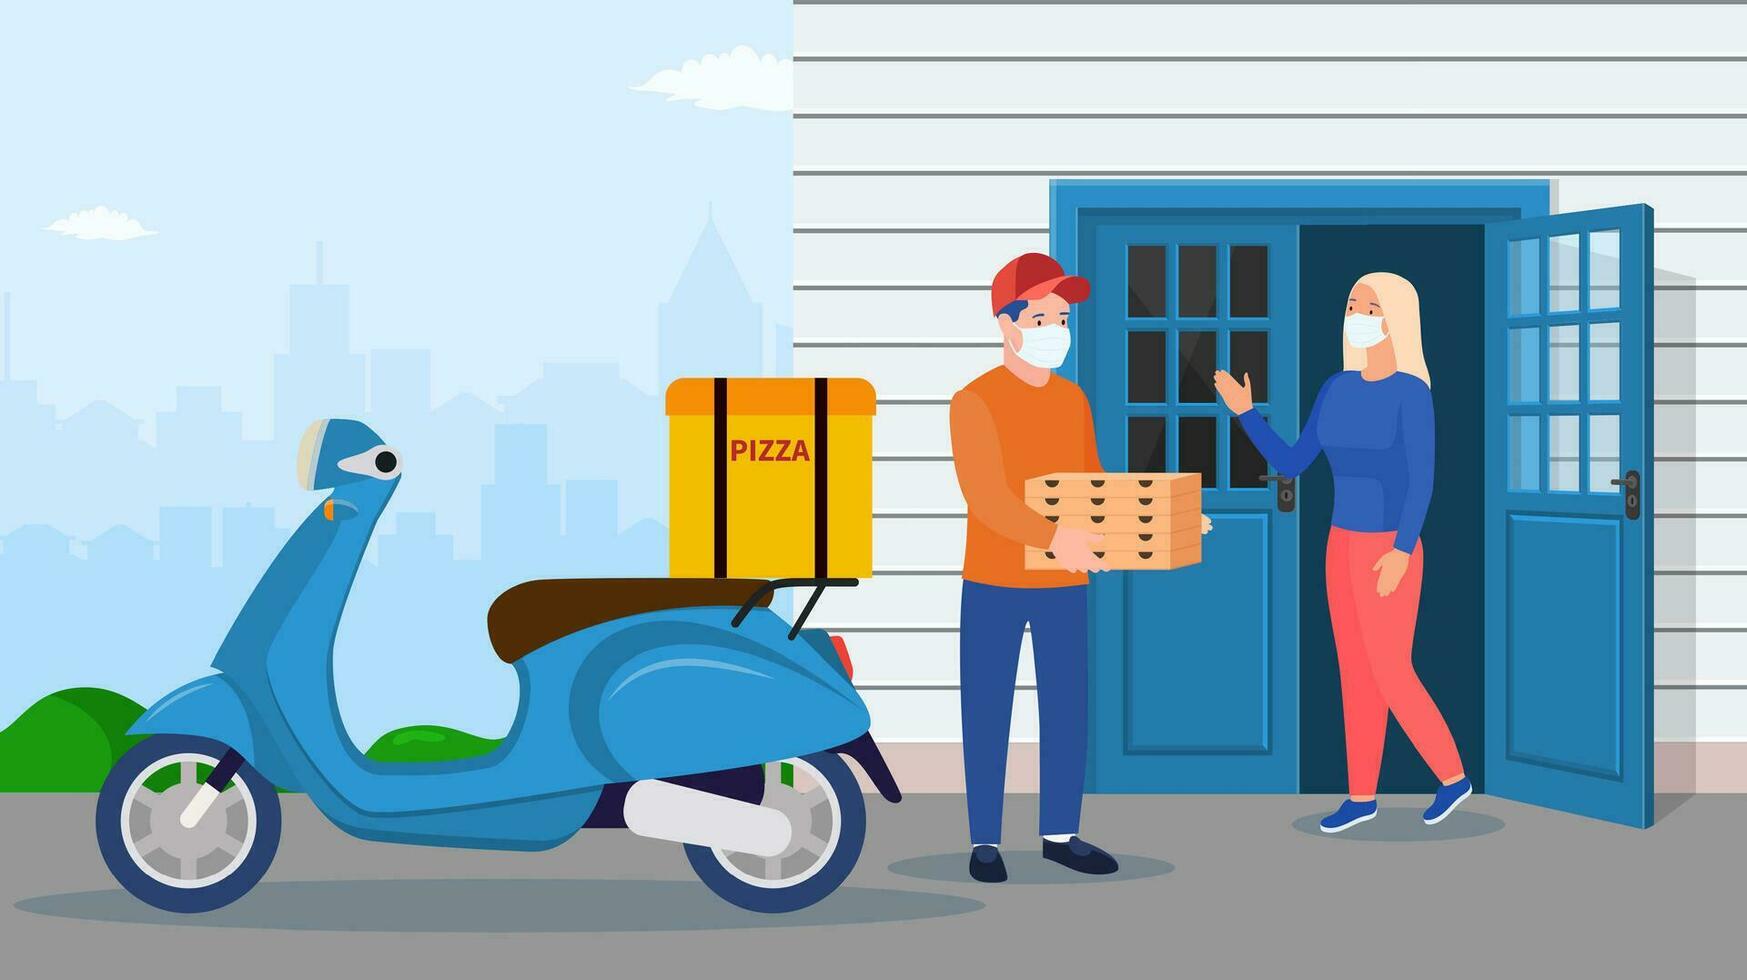 Safe pizza delivery at home during coronavirus. man bringing a pile of pizza boxes near house facade. Courier character holds pizza. Free and fast shipping. Vector illustration in flat style